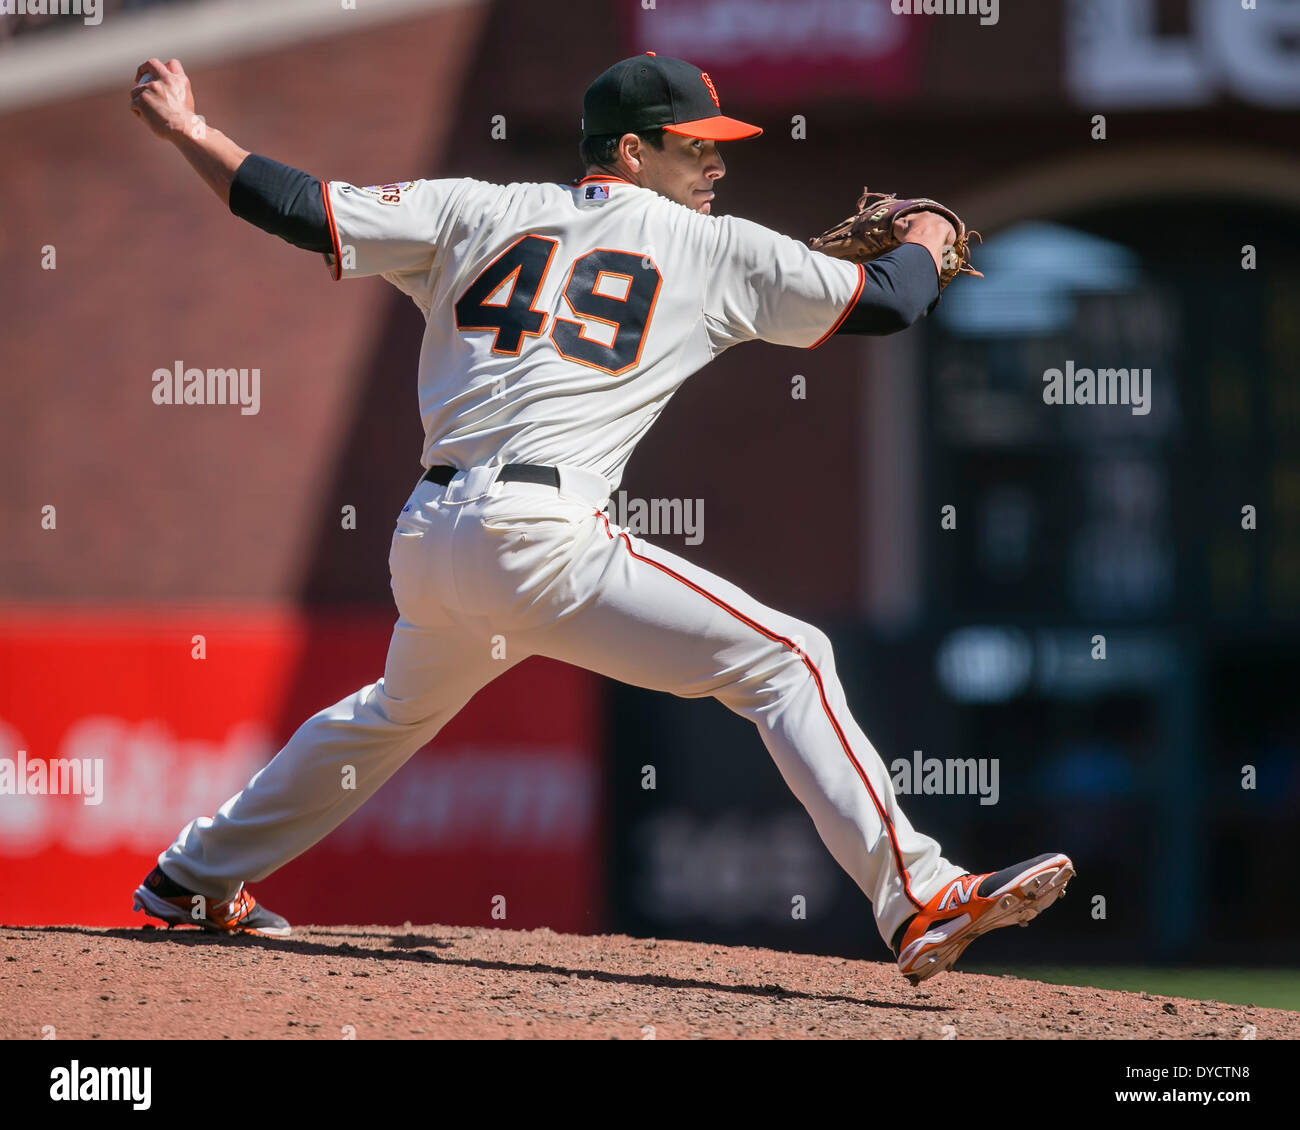 April 20, 2013: San Francisco Giants relief pitcher Javier Lopez (49) in action during the MLB baseball game between the Colorado Rockies and the San Francisco Giants at AT&T Park in San Francisco CA. The Giants defeated the Rockies 5-4. Damon Tarver/Cal Sport Media Stock Photo